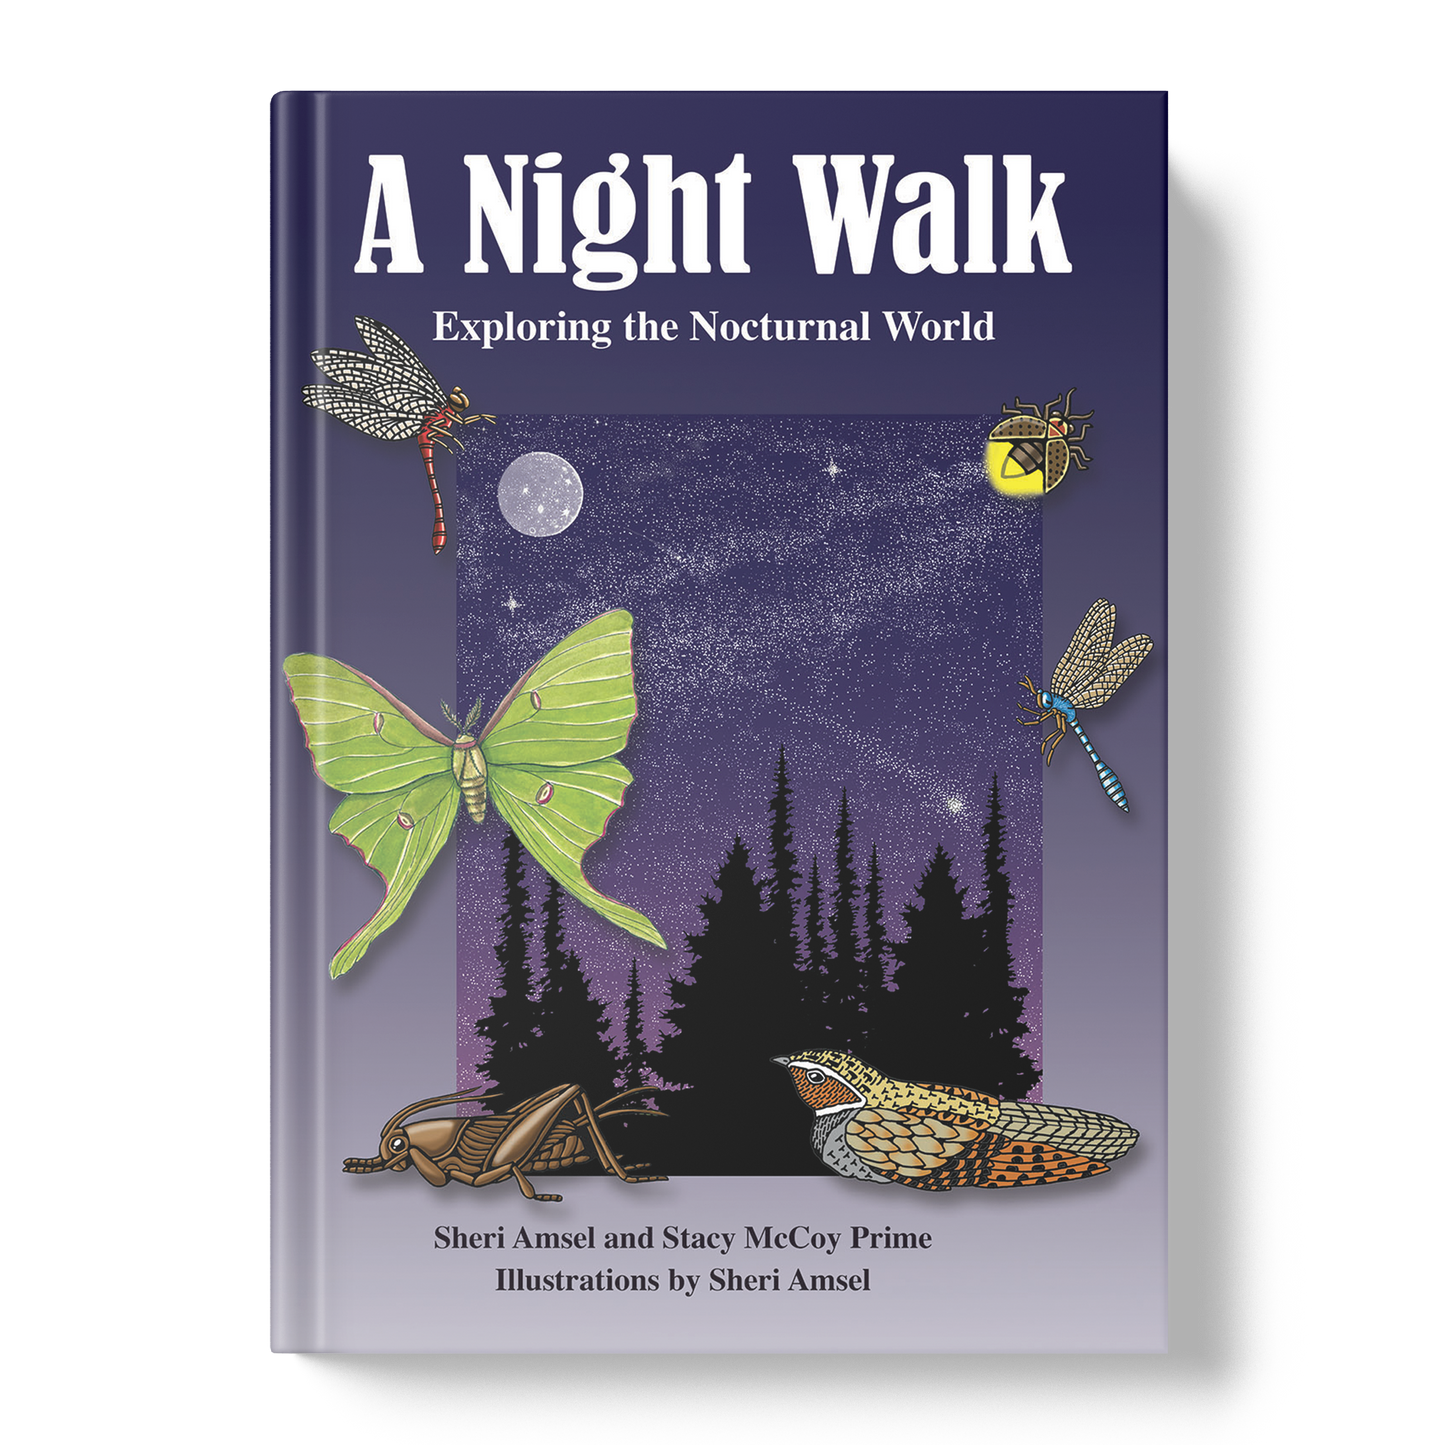 A Night Walk: Exploring the Nocturnal World